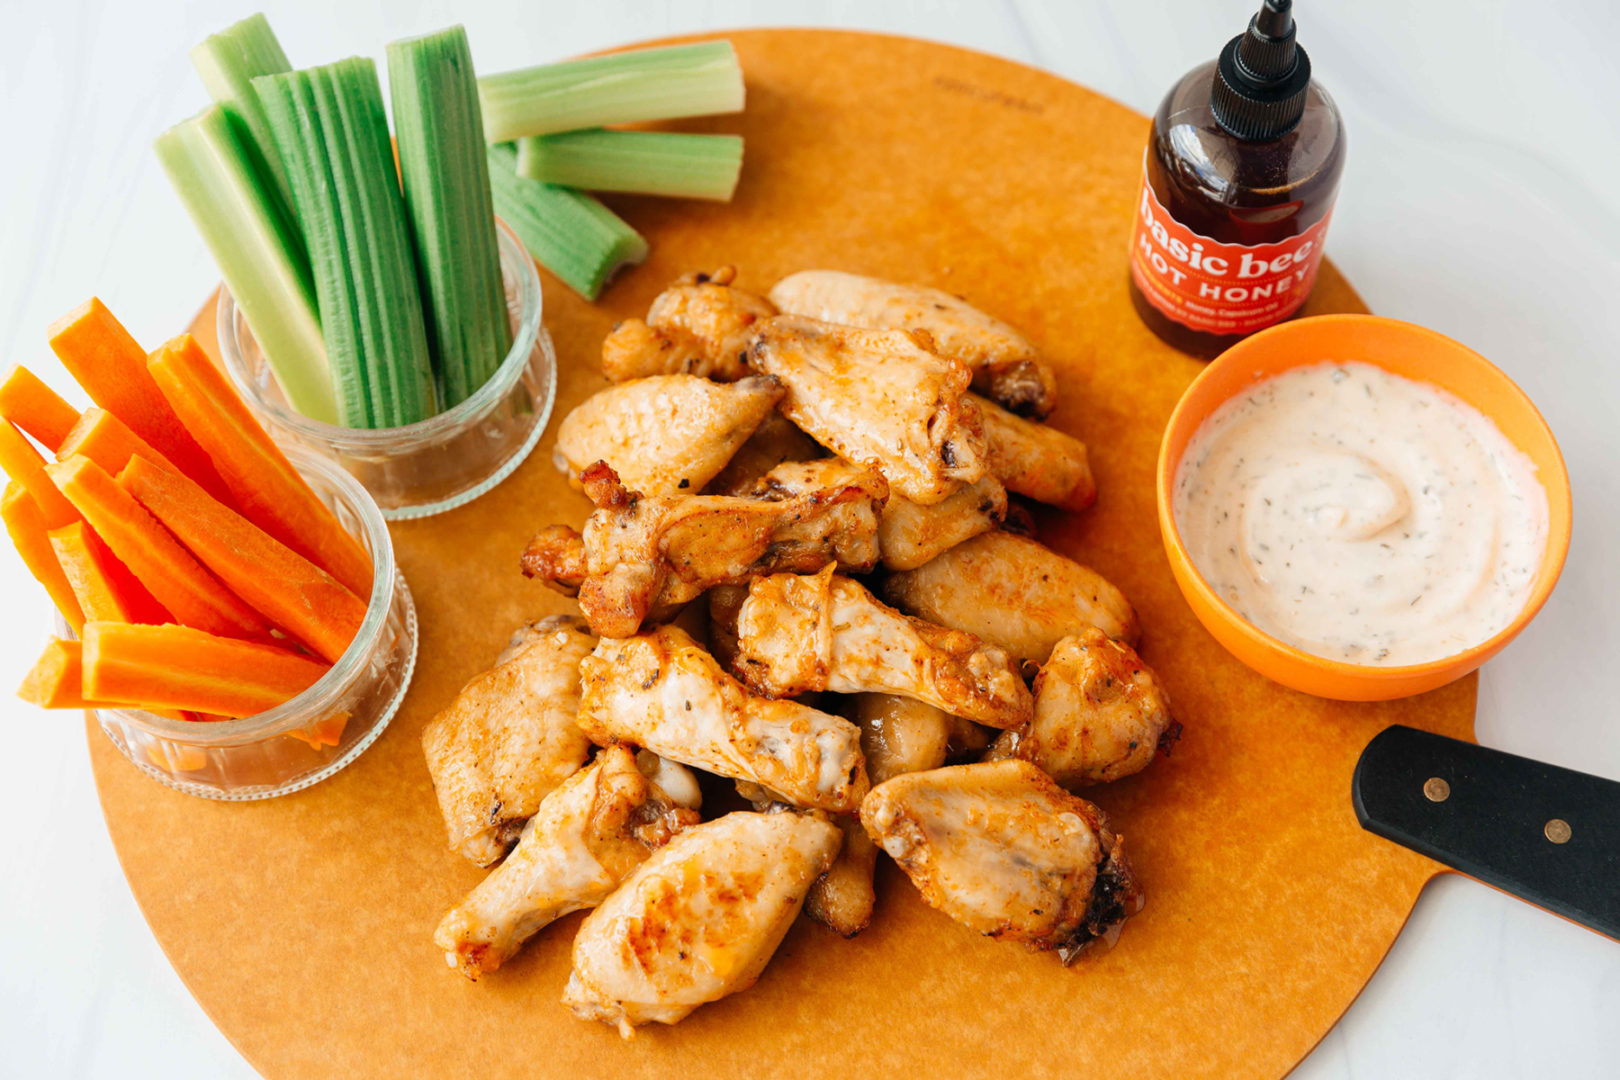 Honey Chipotle Wing board with hot honey